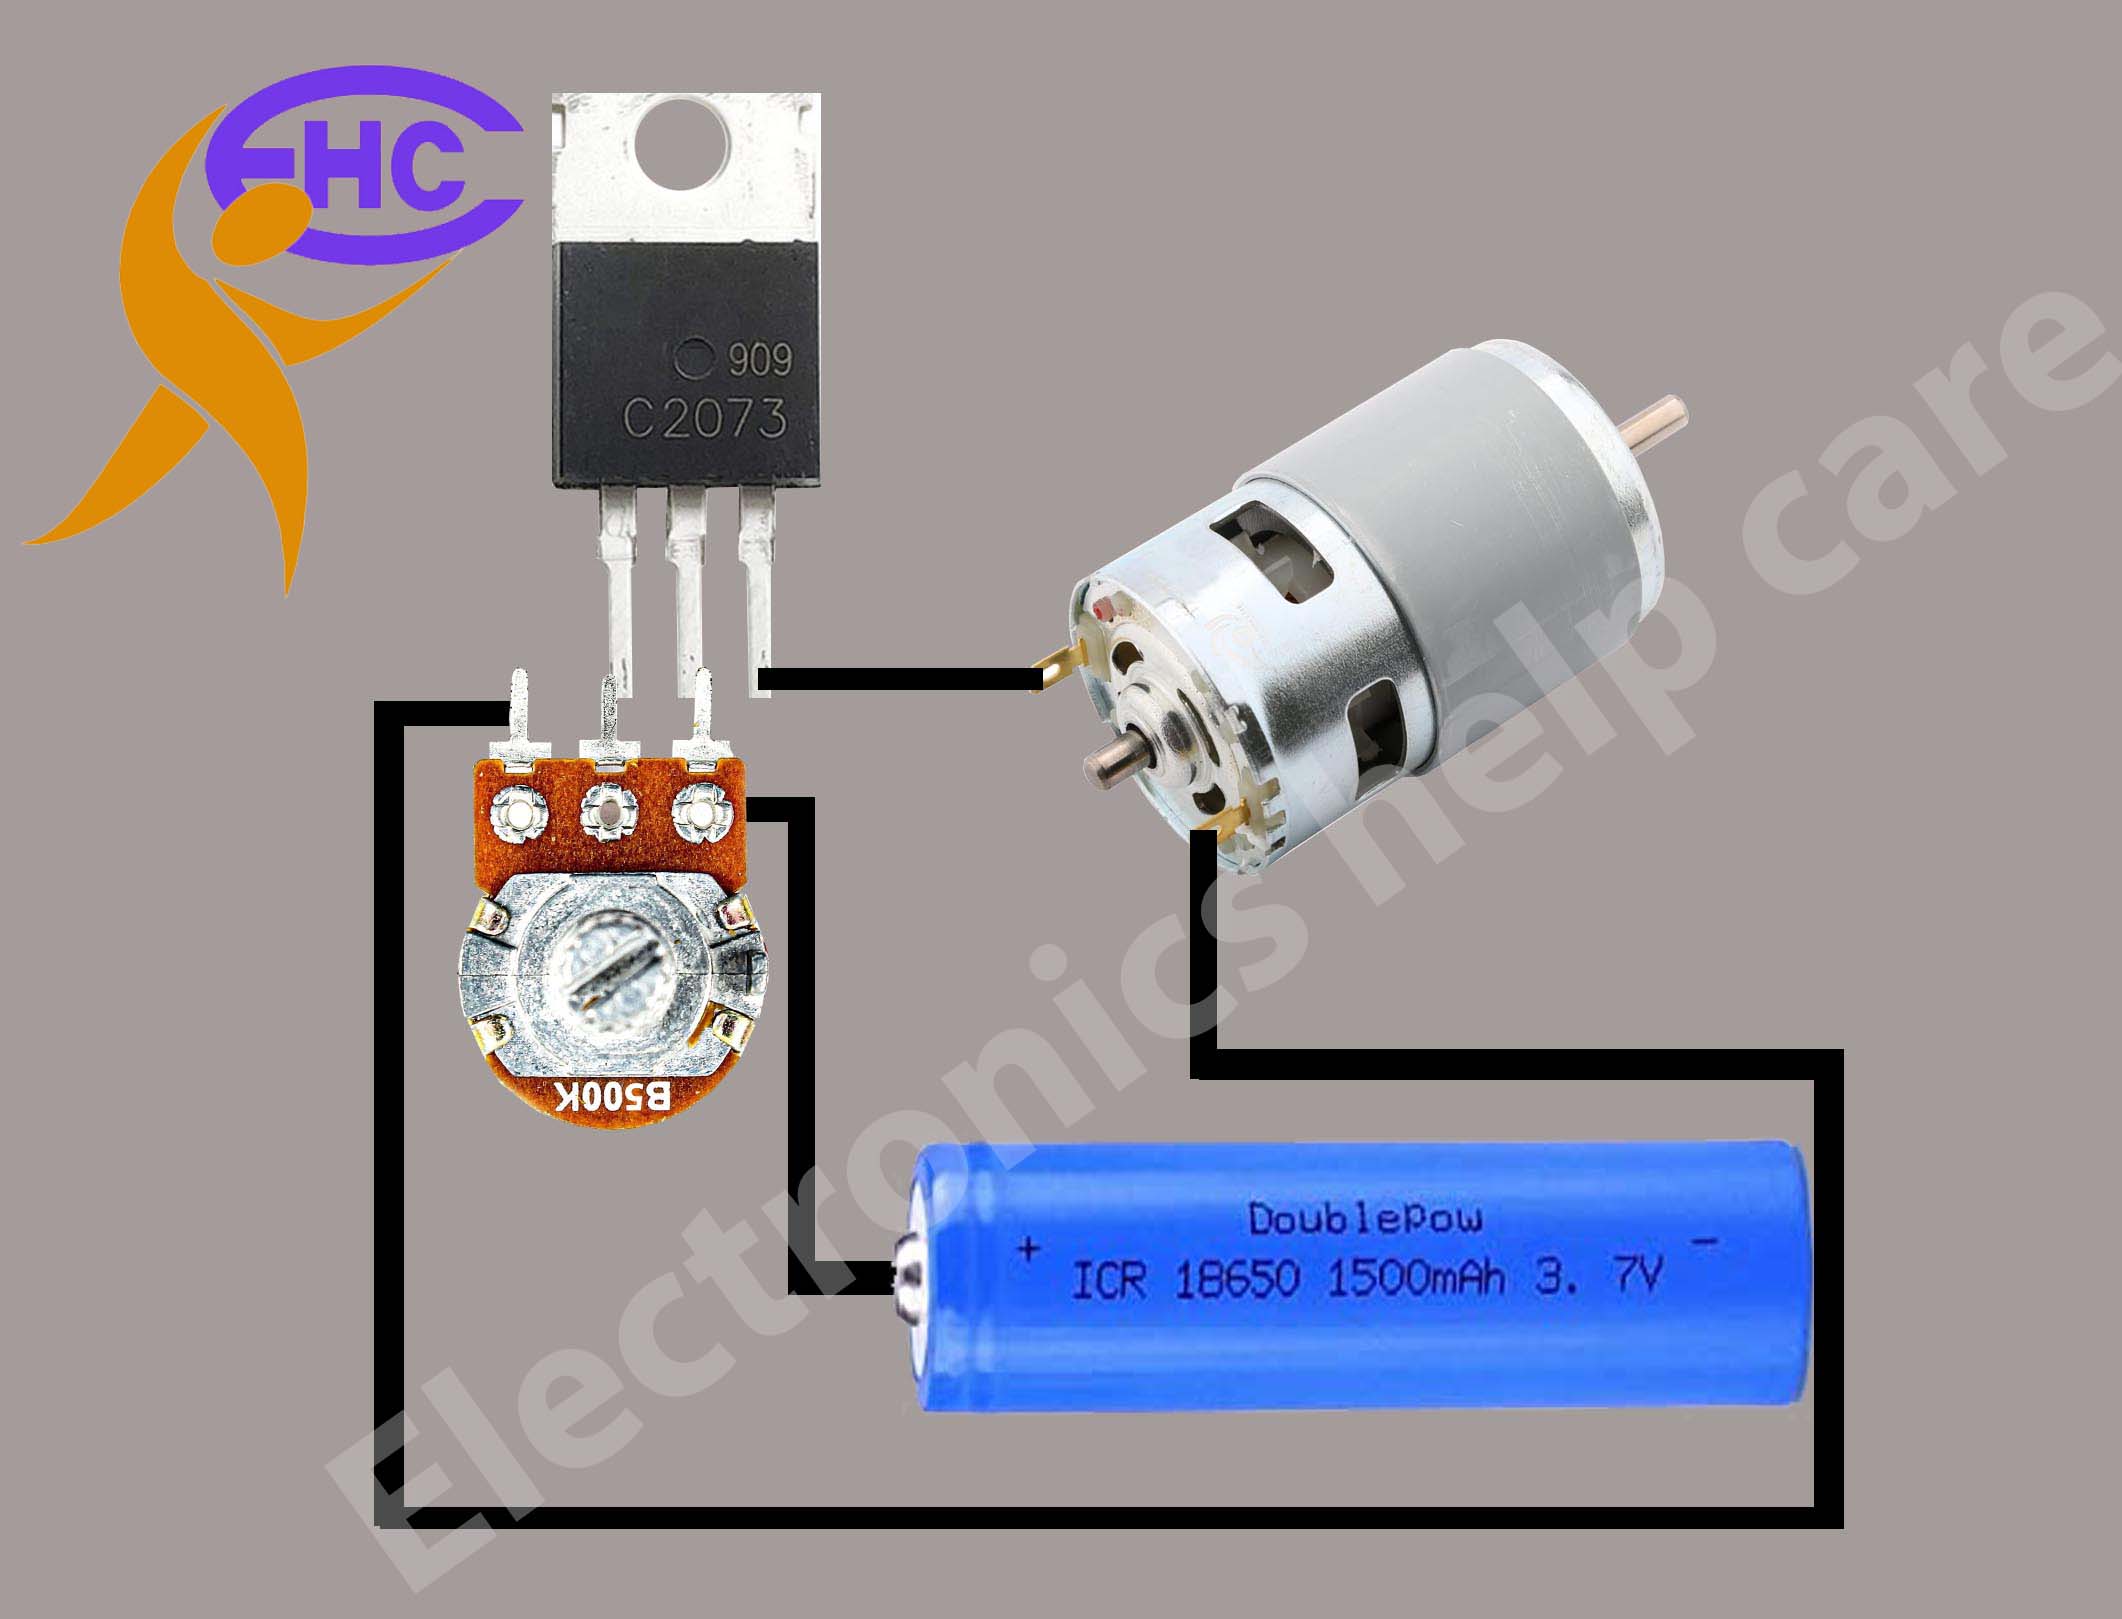 transistors - How to control the speed of a 12V DC motor with an